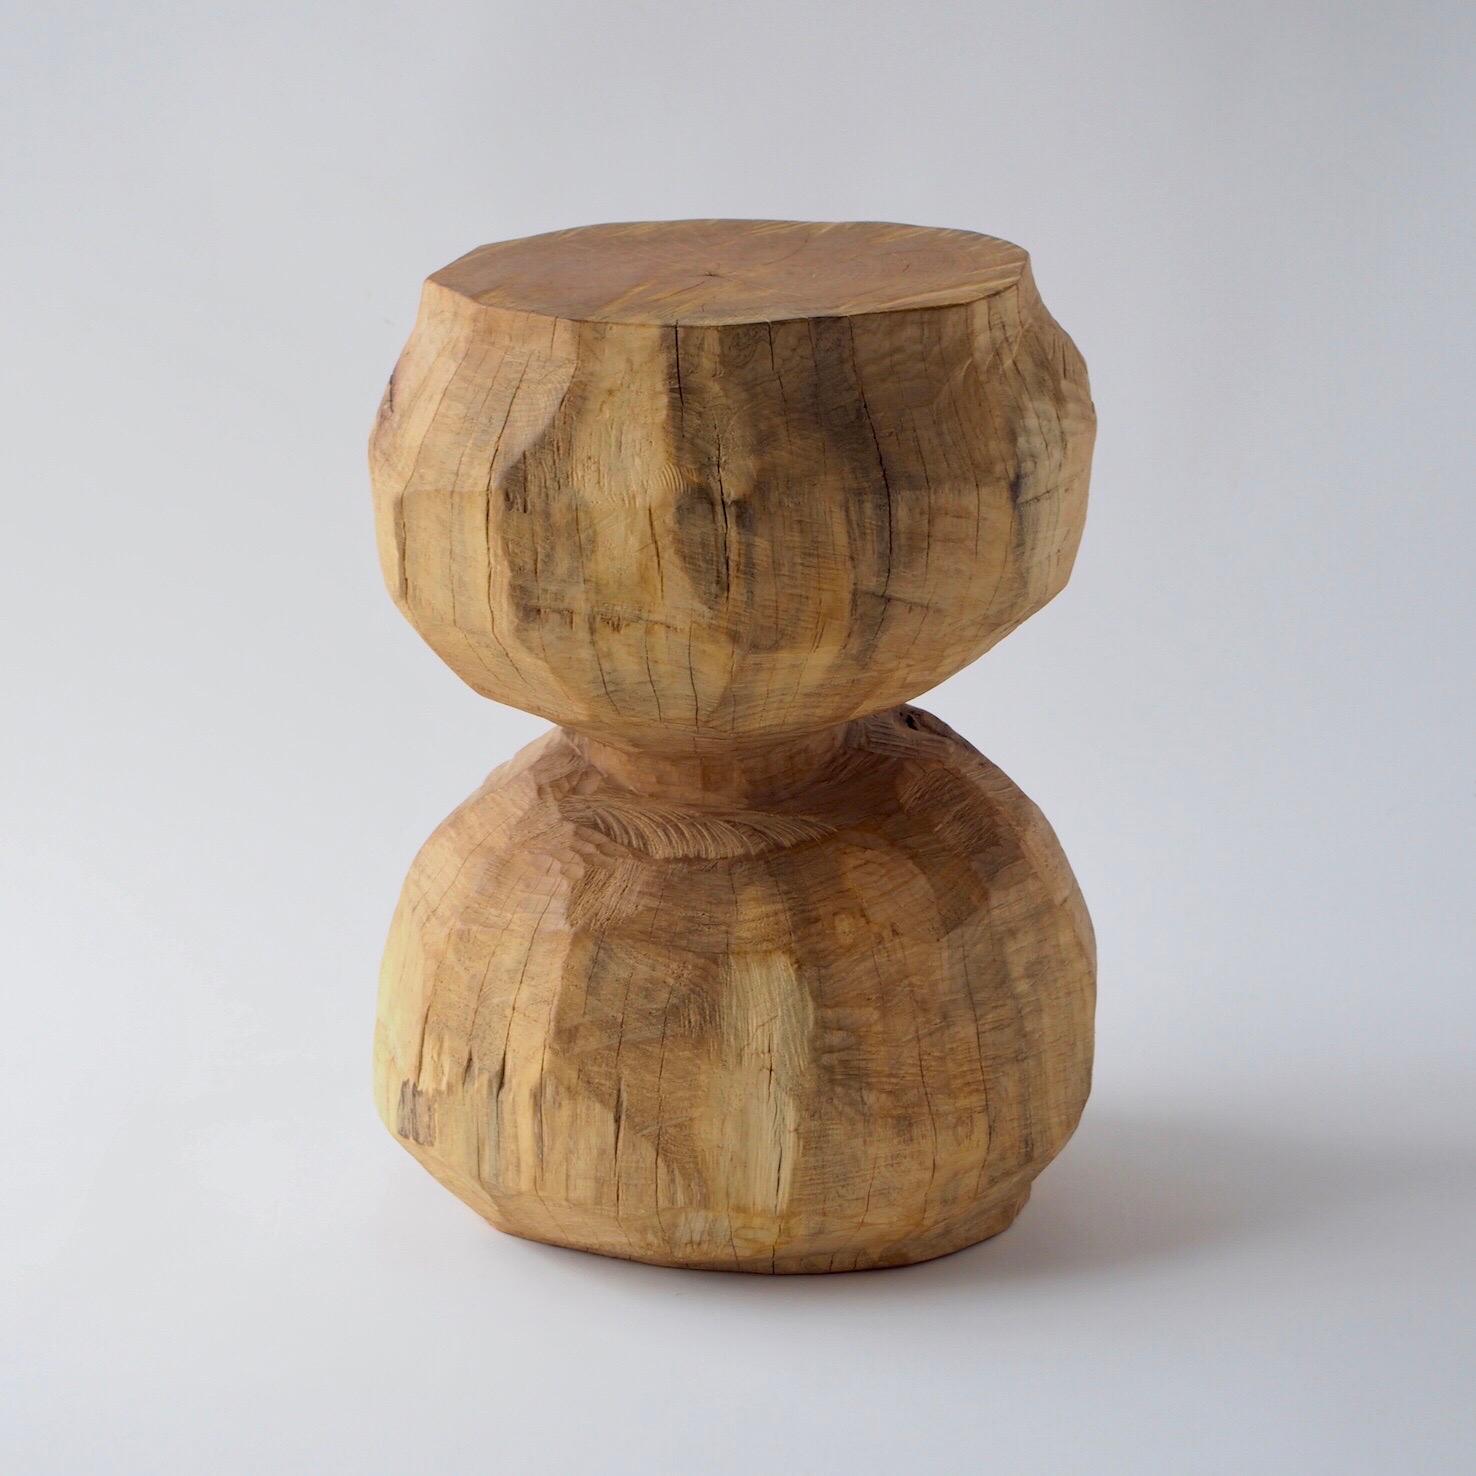 Hand-Carved Hiroyuki Nishimura Zougei Sculptural Side Table Stool 27 Tribal Glamping For Sale